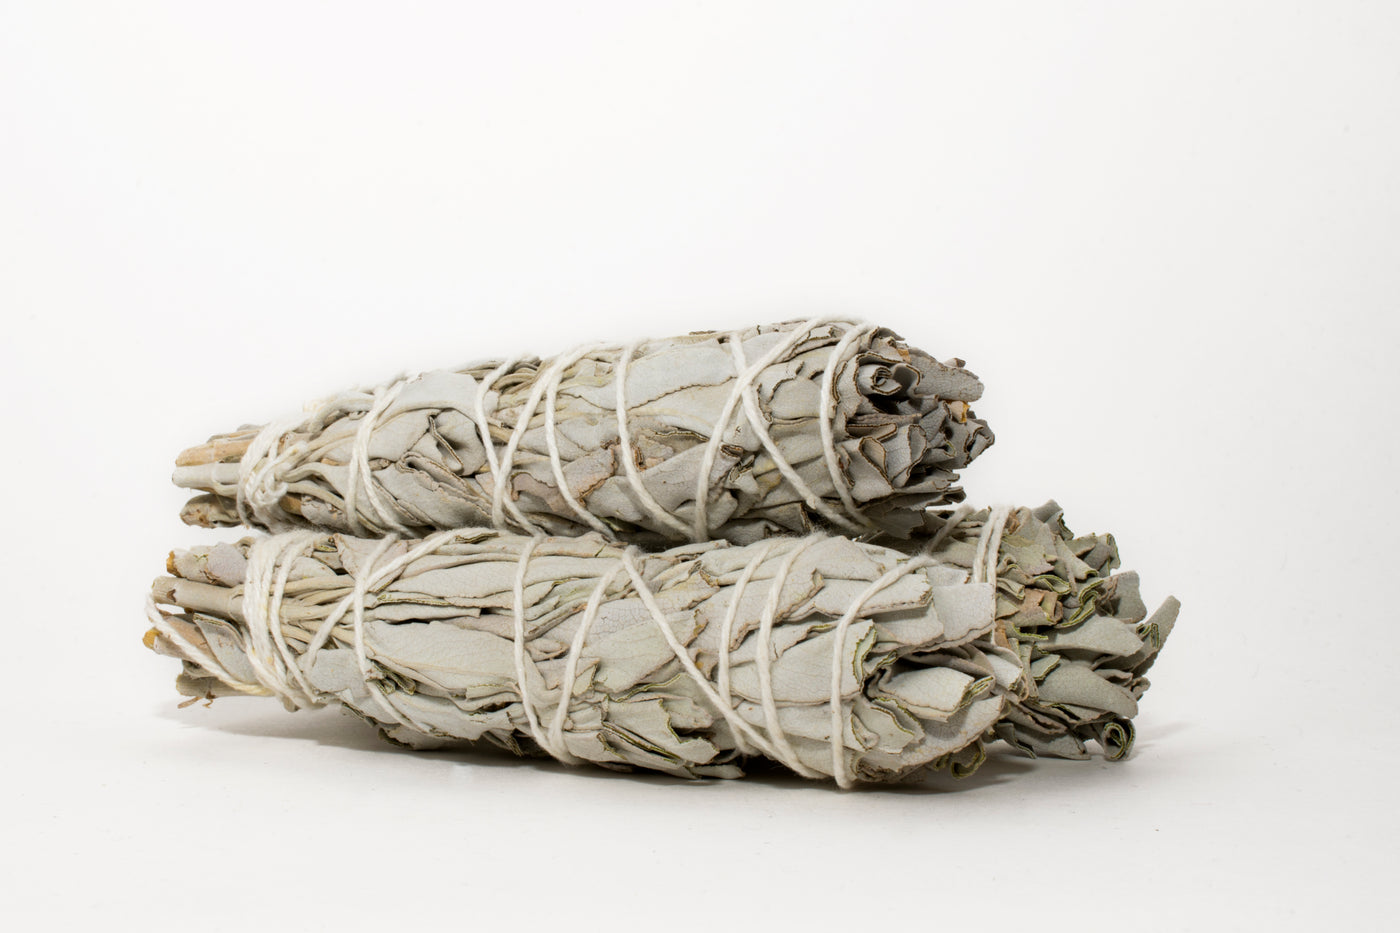 Pieces of sage stacked together